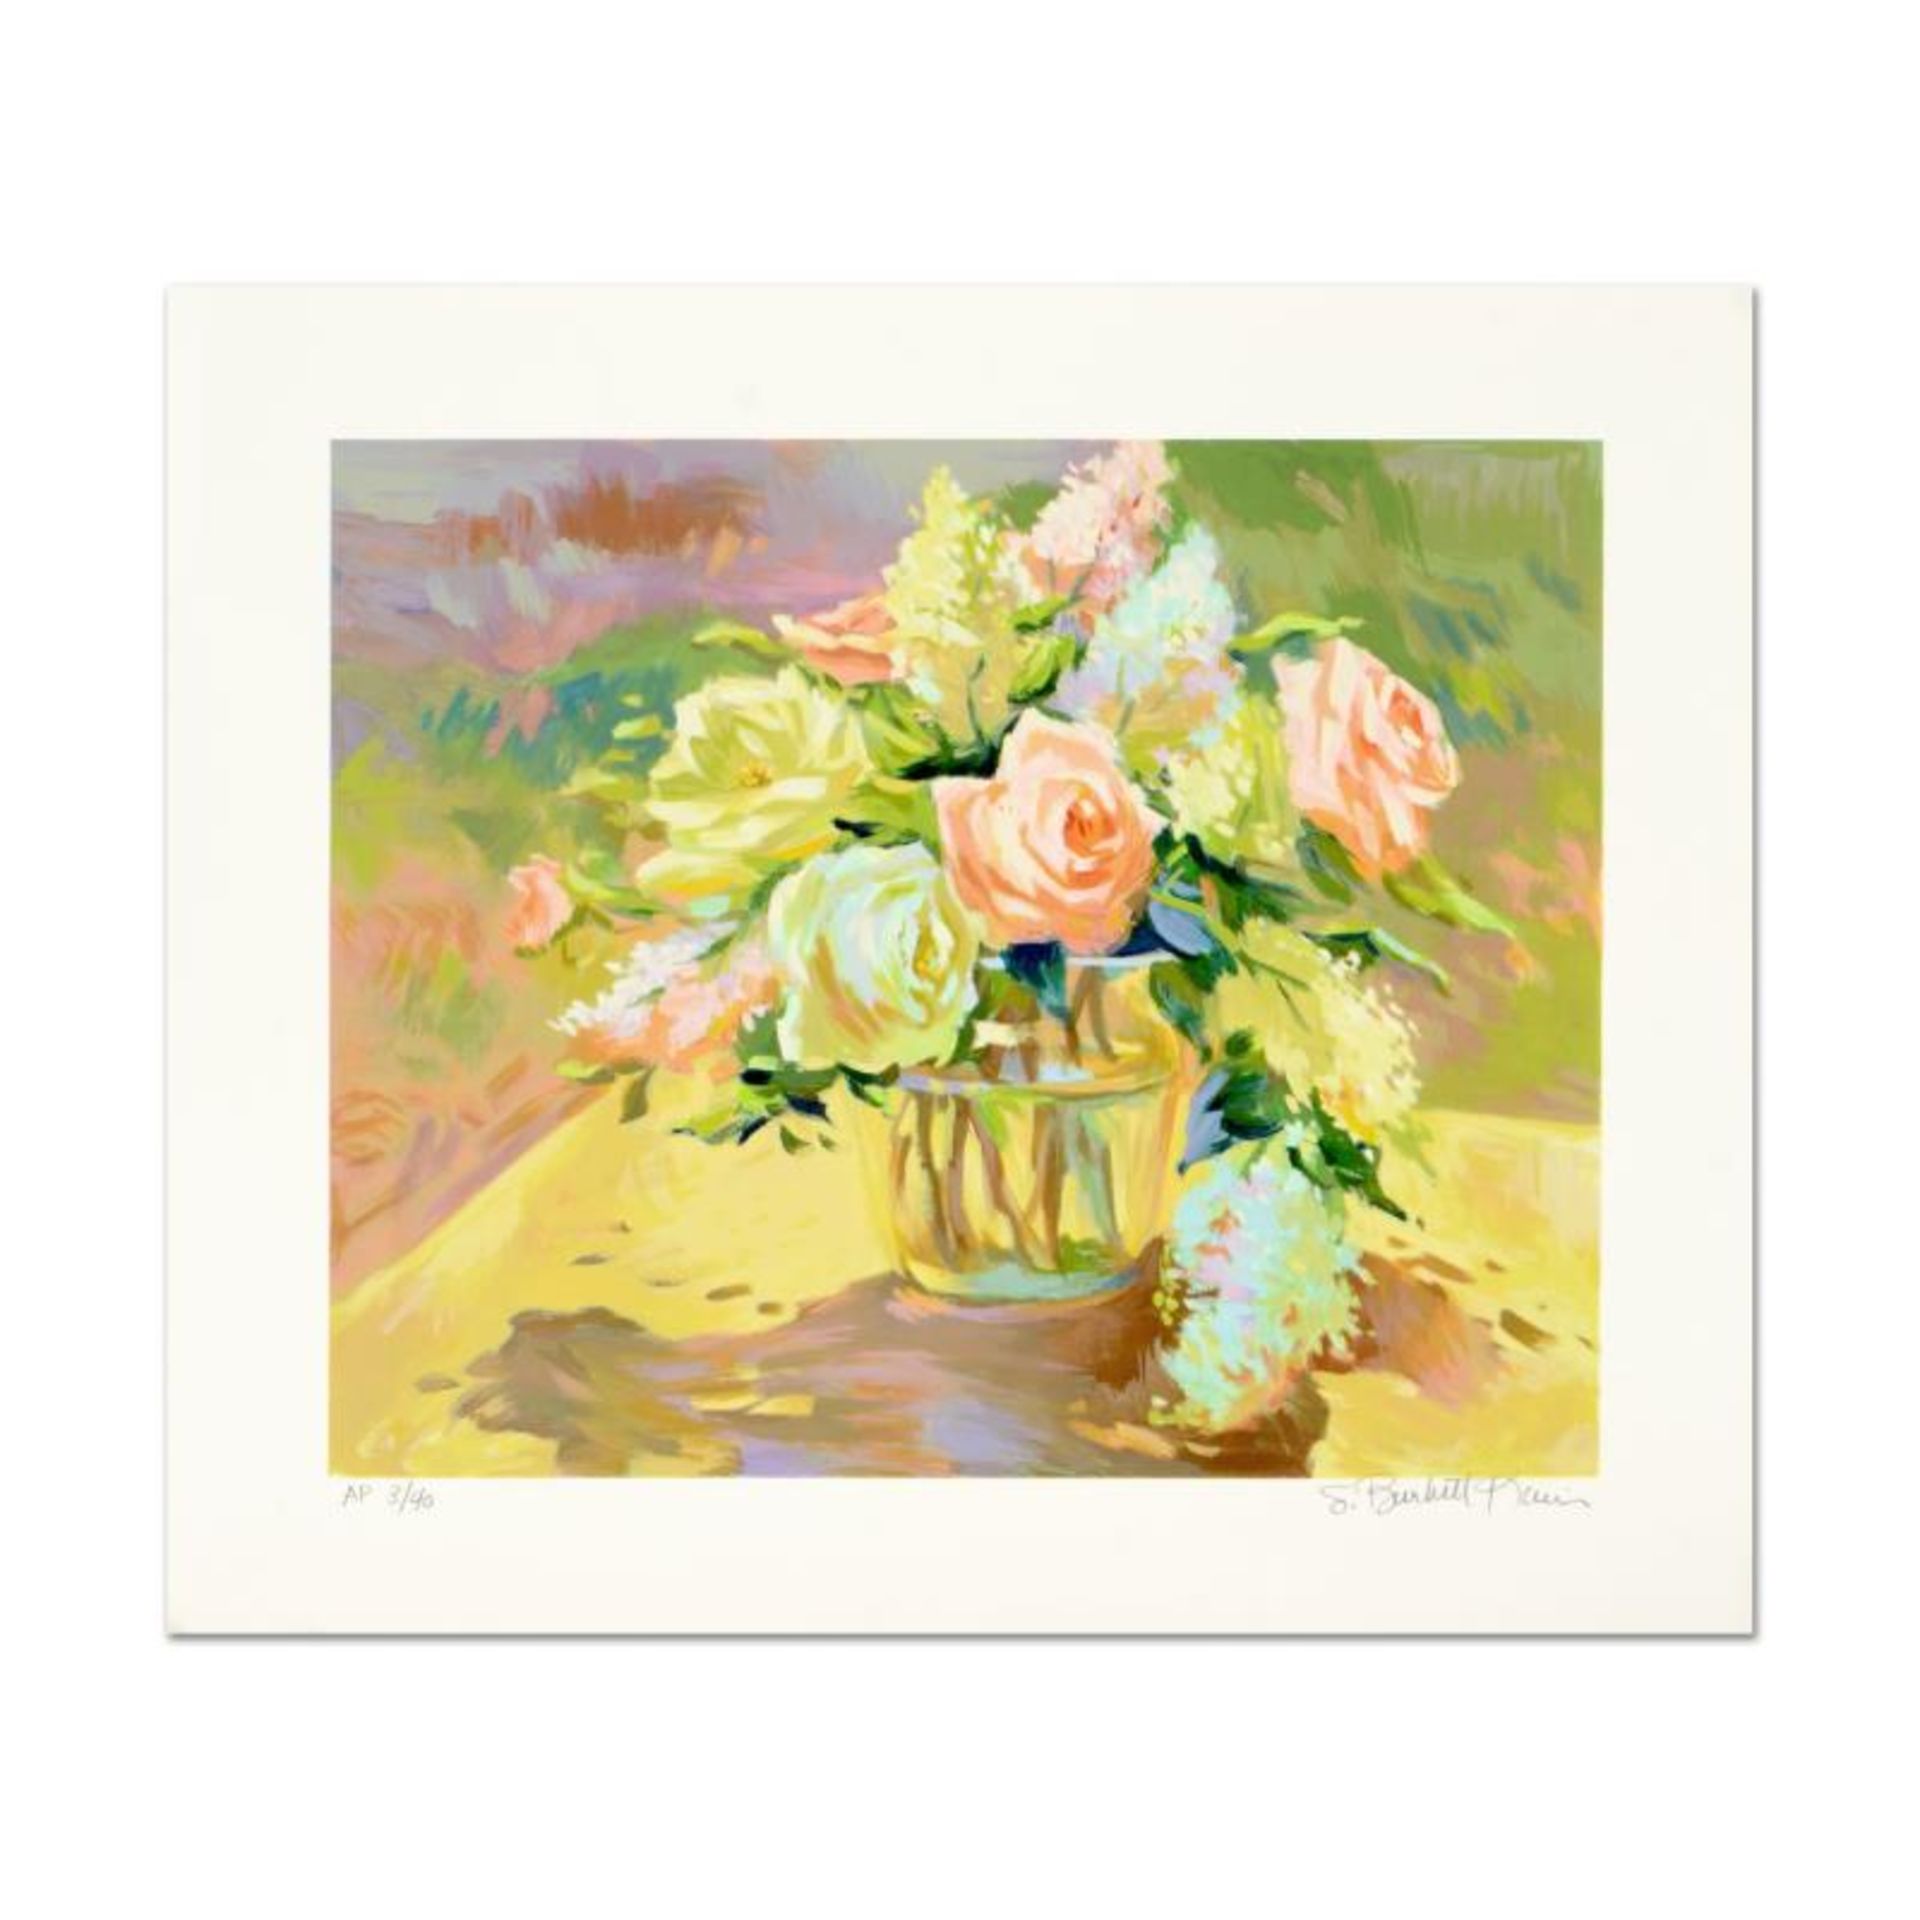 S. Burkett Kaiser, "Summer Roses" Limited Edition, Numbered and Hand Signed with